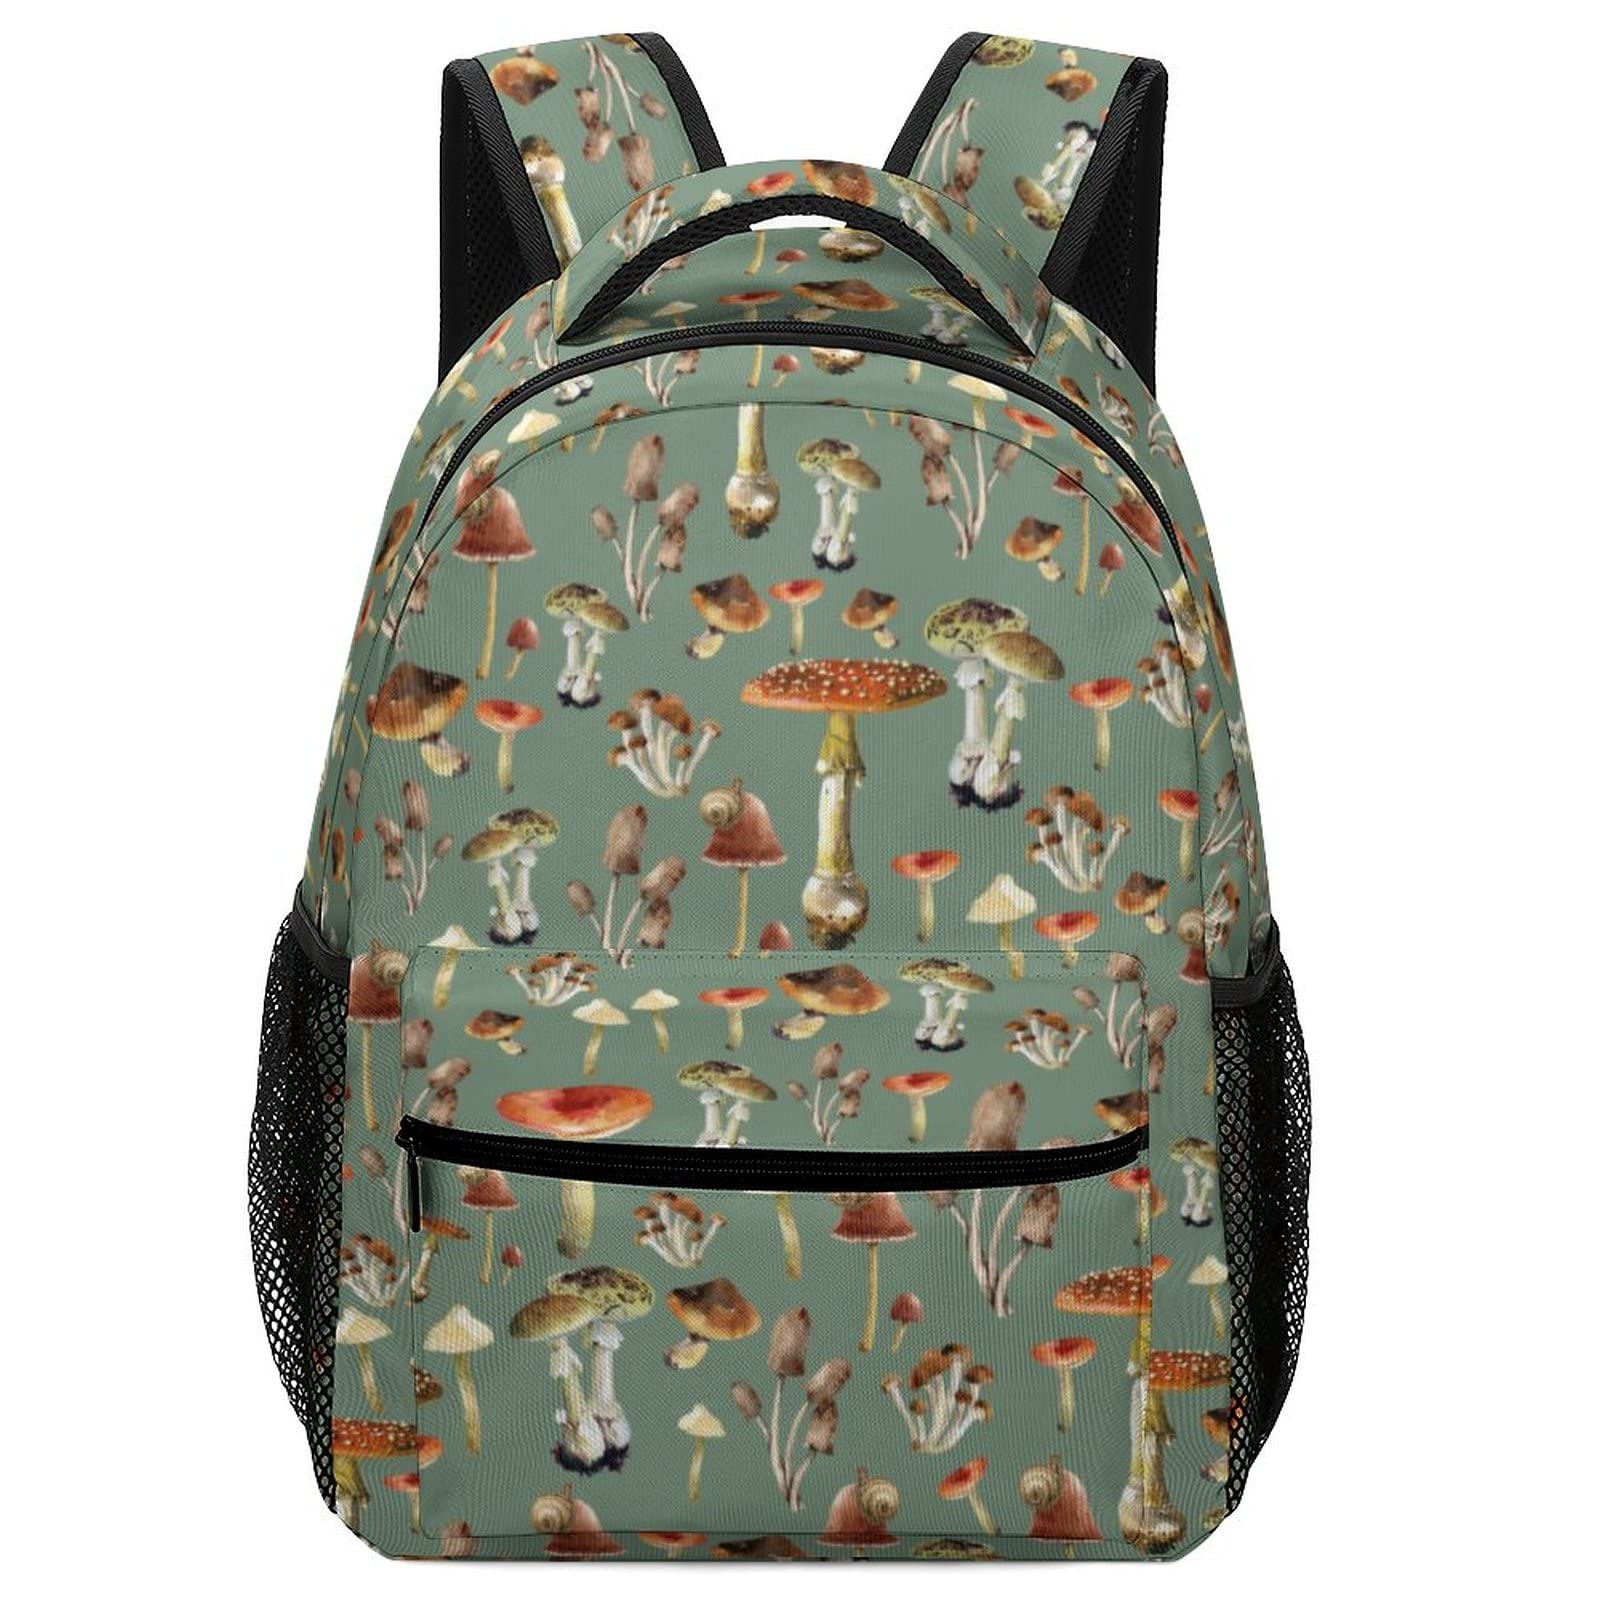 Wild Forest Mushrooms School Backpack Gifts Fashion Travel Laptop Backpack for Men Women Teenagers Children